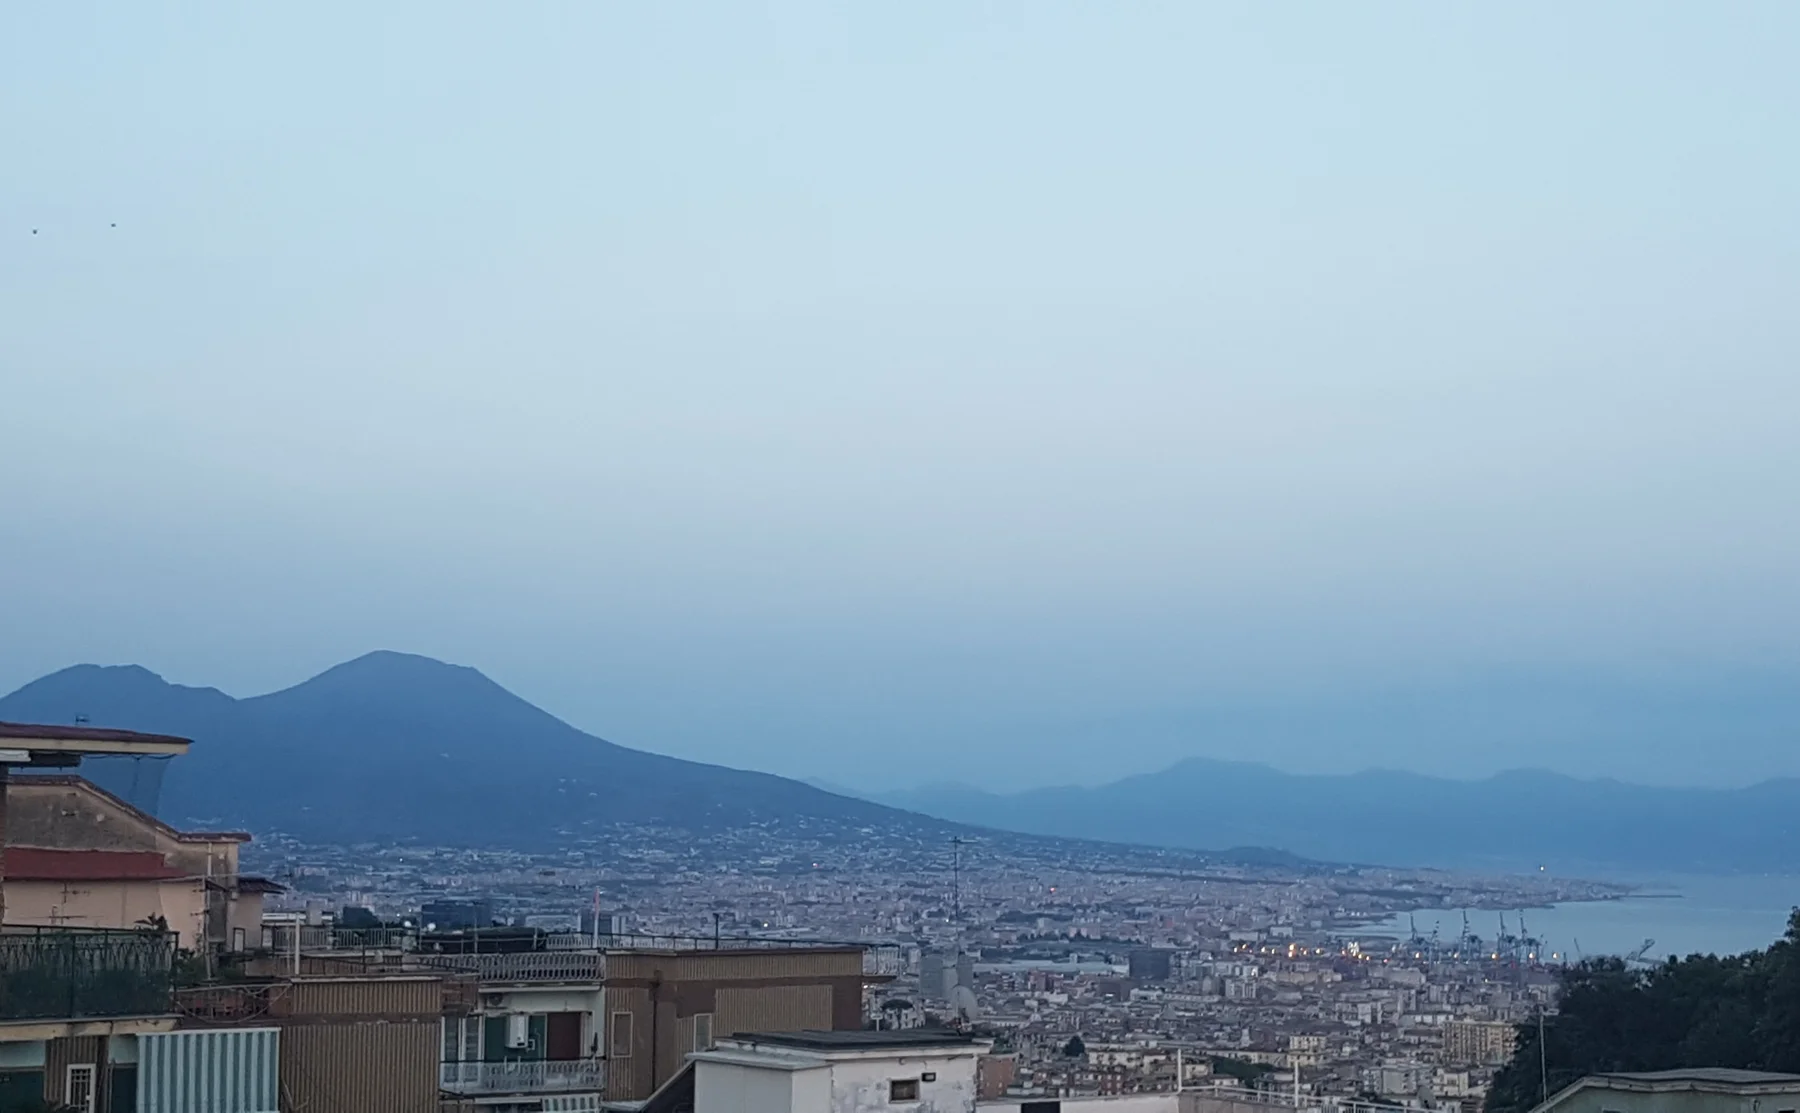 Make Neapolitan Pizza With A View Of Naples Like No Other - 1149194